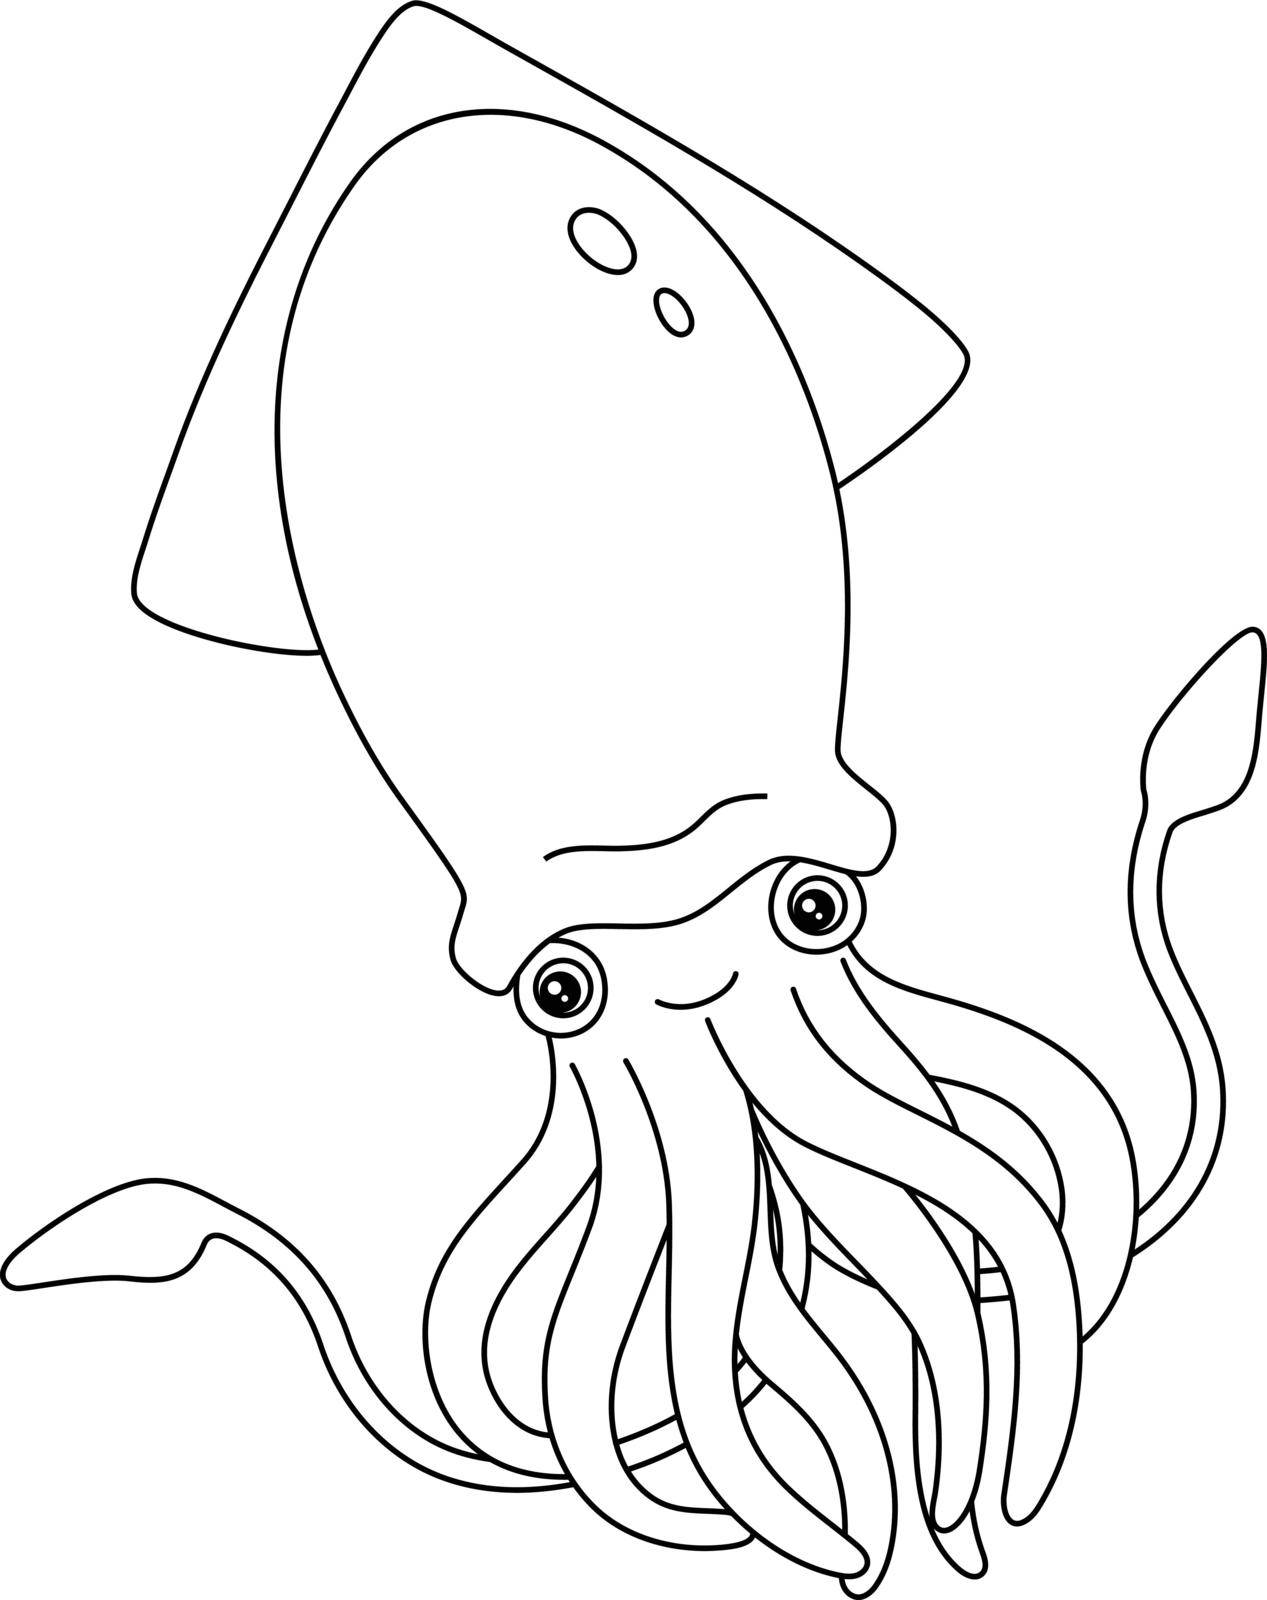 Giant Squid Coloring Page Isolated for Kids by abbydesign